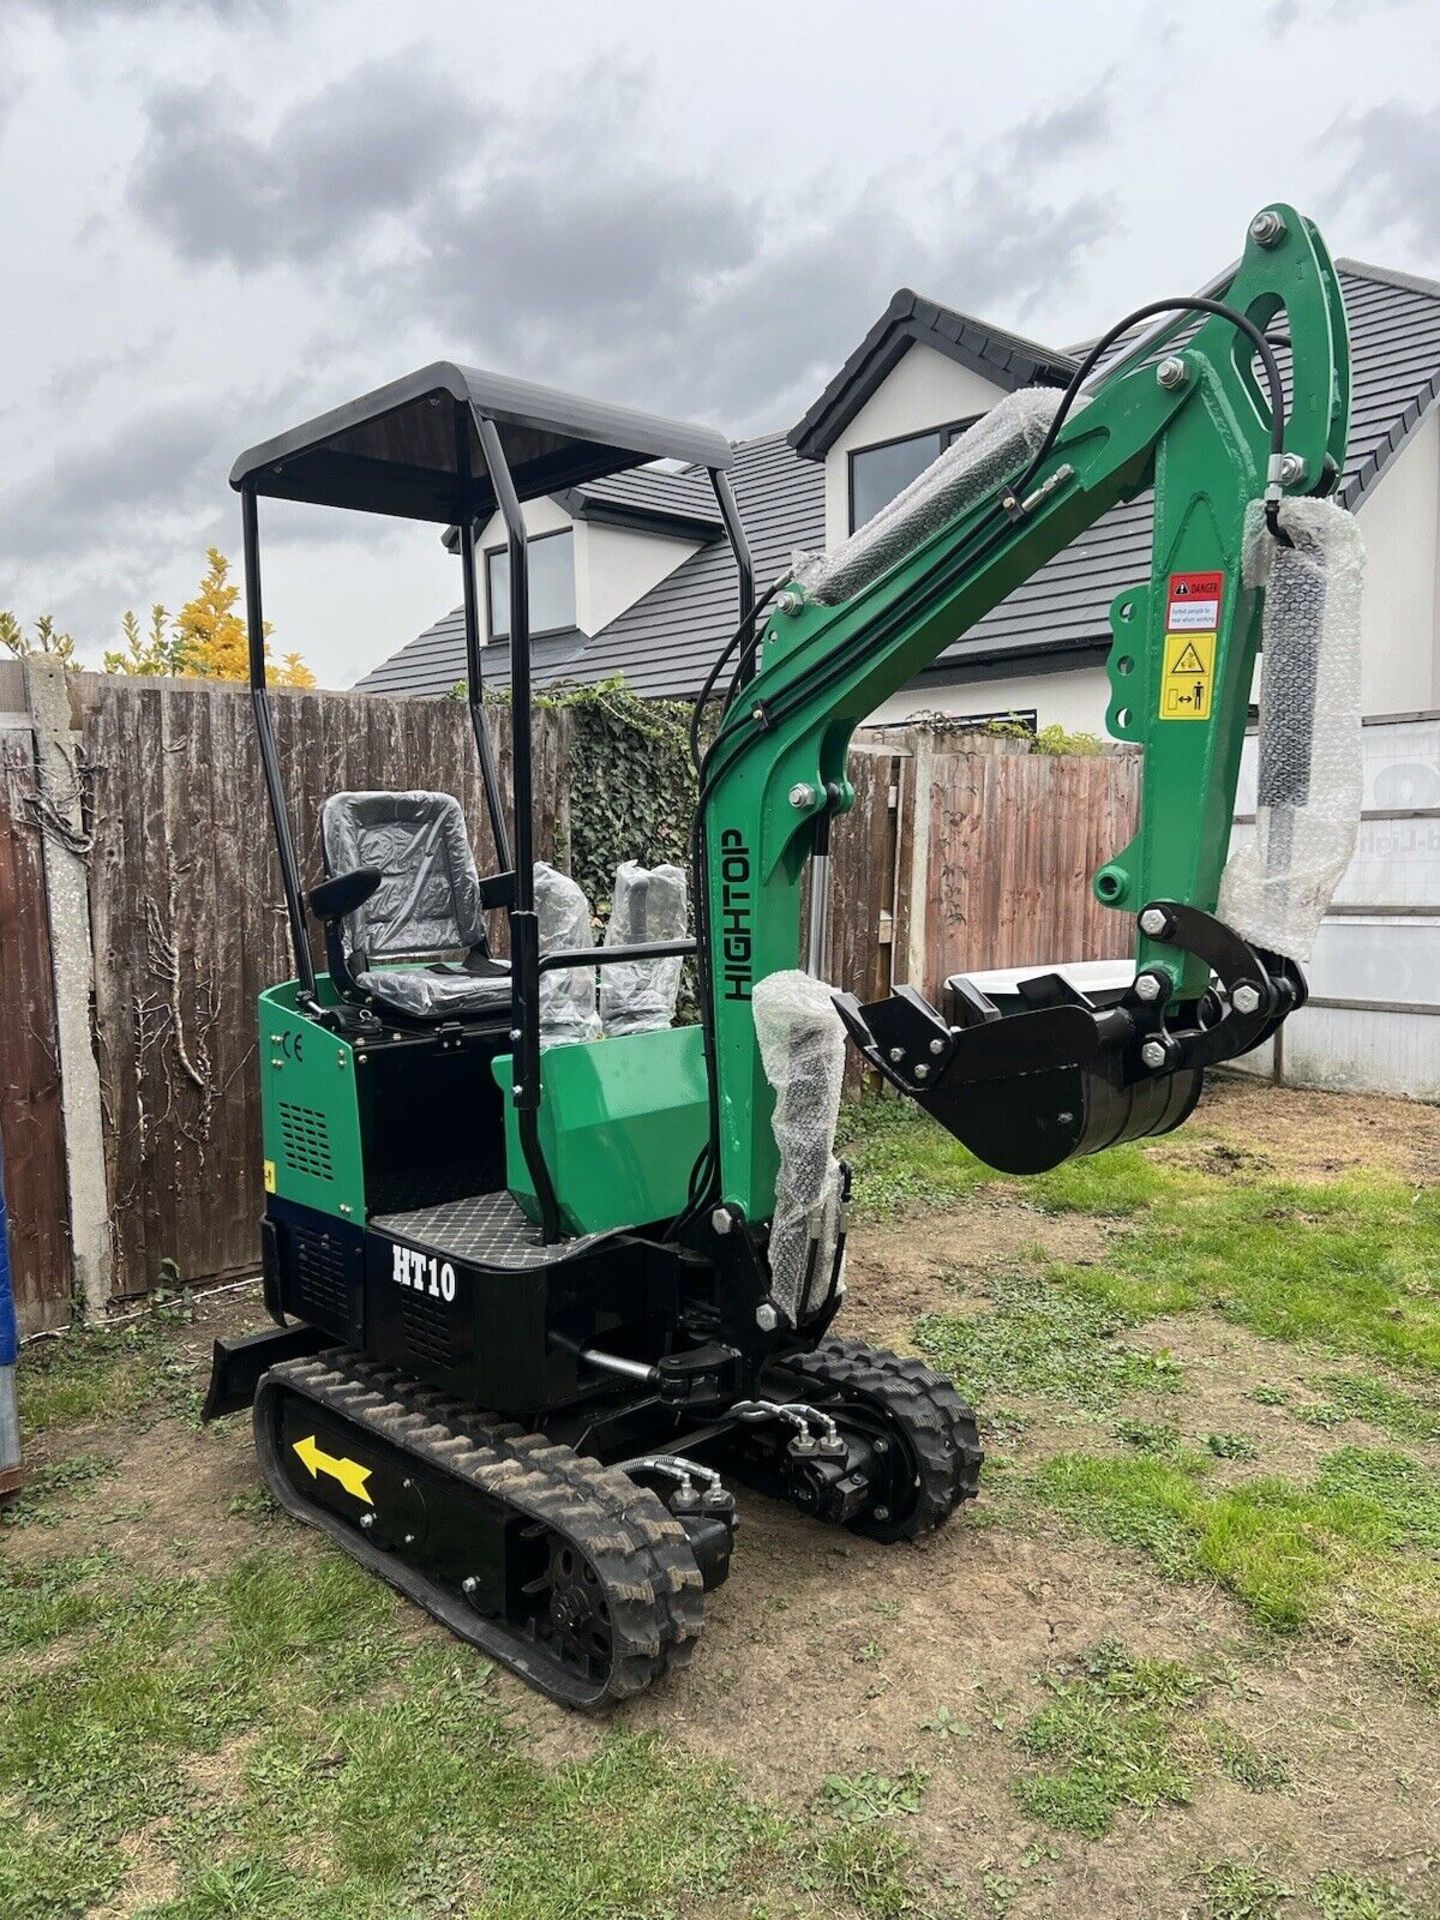 BRAND NEW HIGHTOP HT10 MINI DIGGER EXCAVATOR 1 TON WITH BOOM SWING & 3 BUCKETS - Image 9 of 11